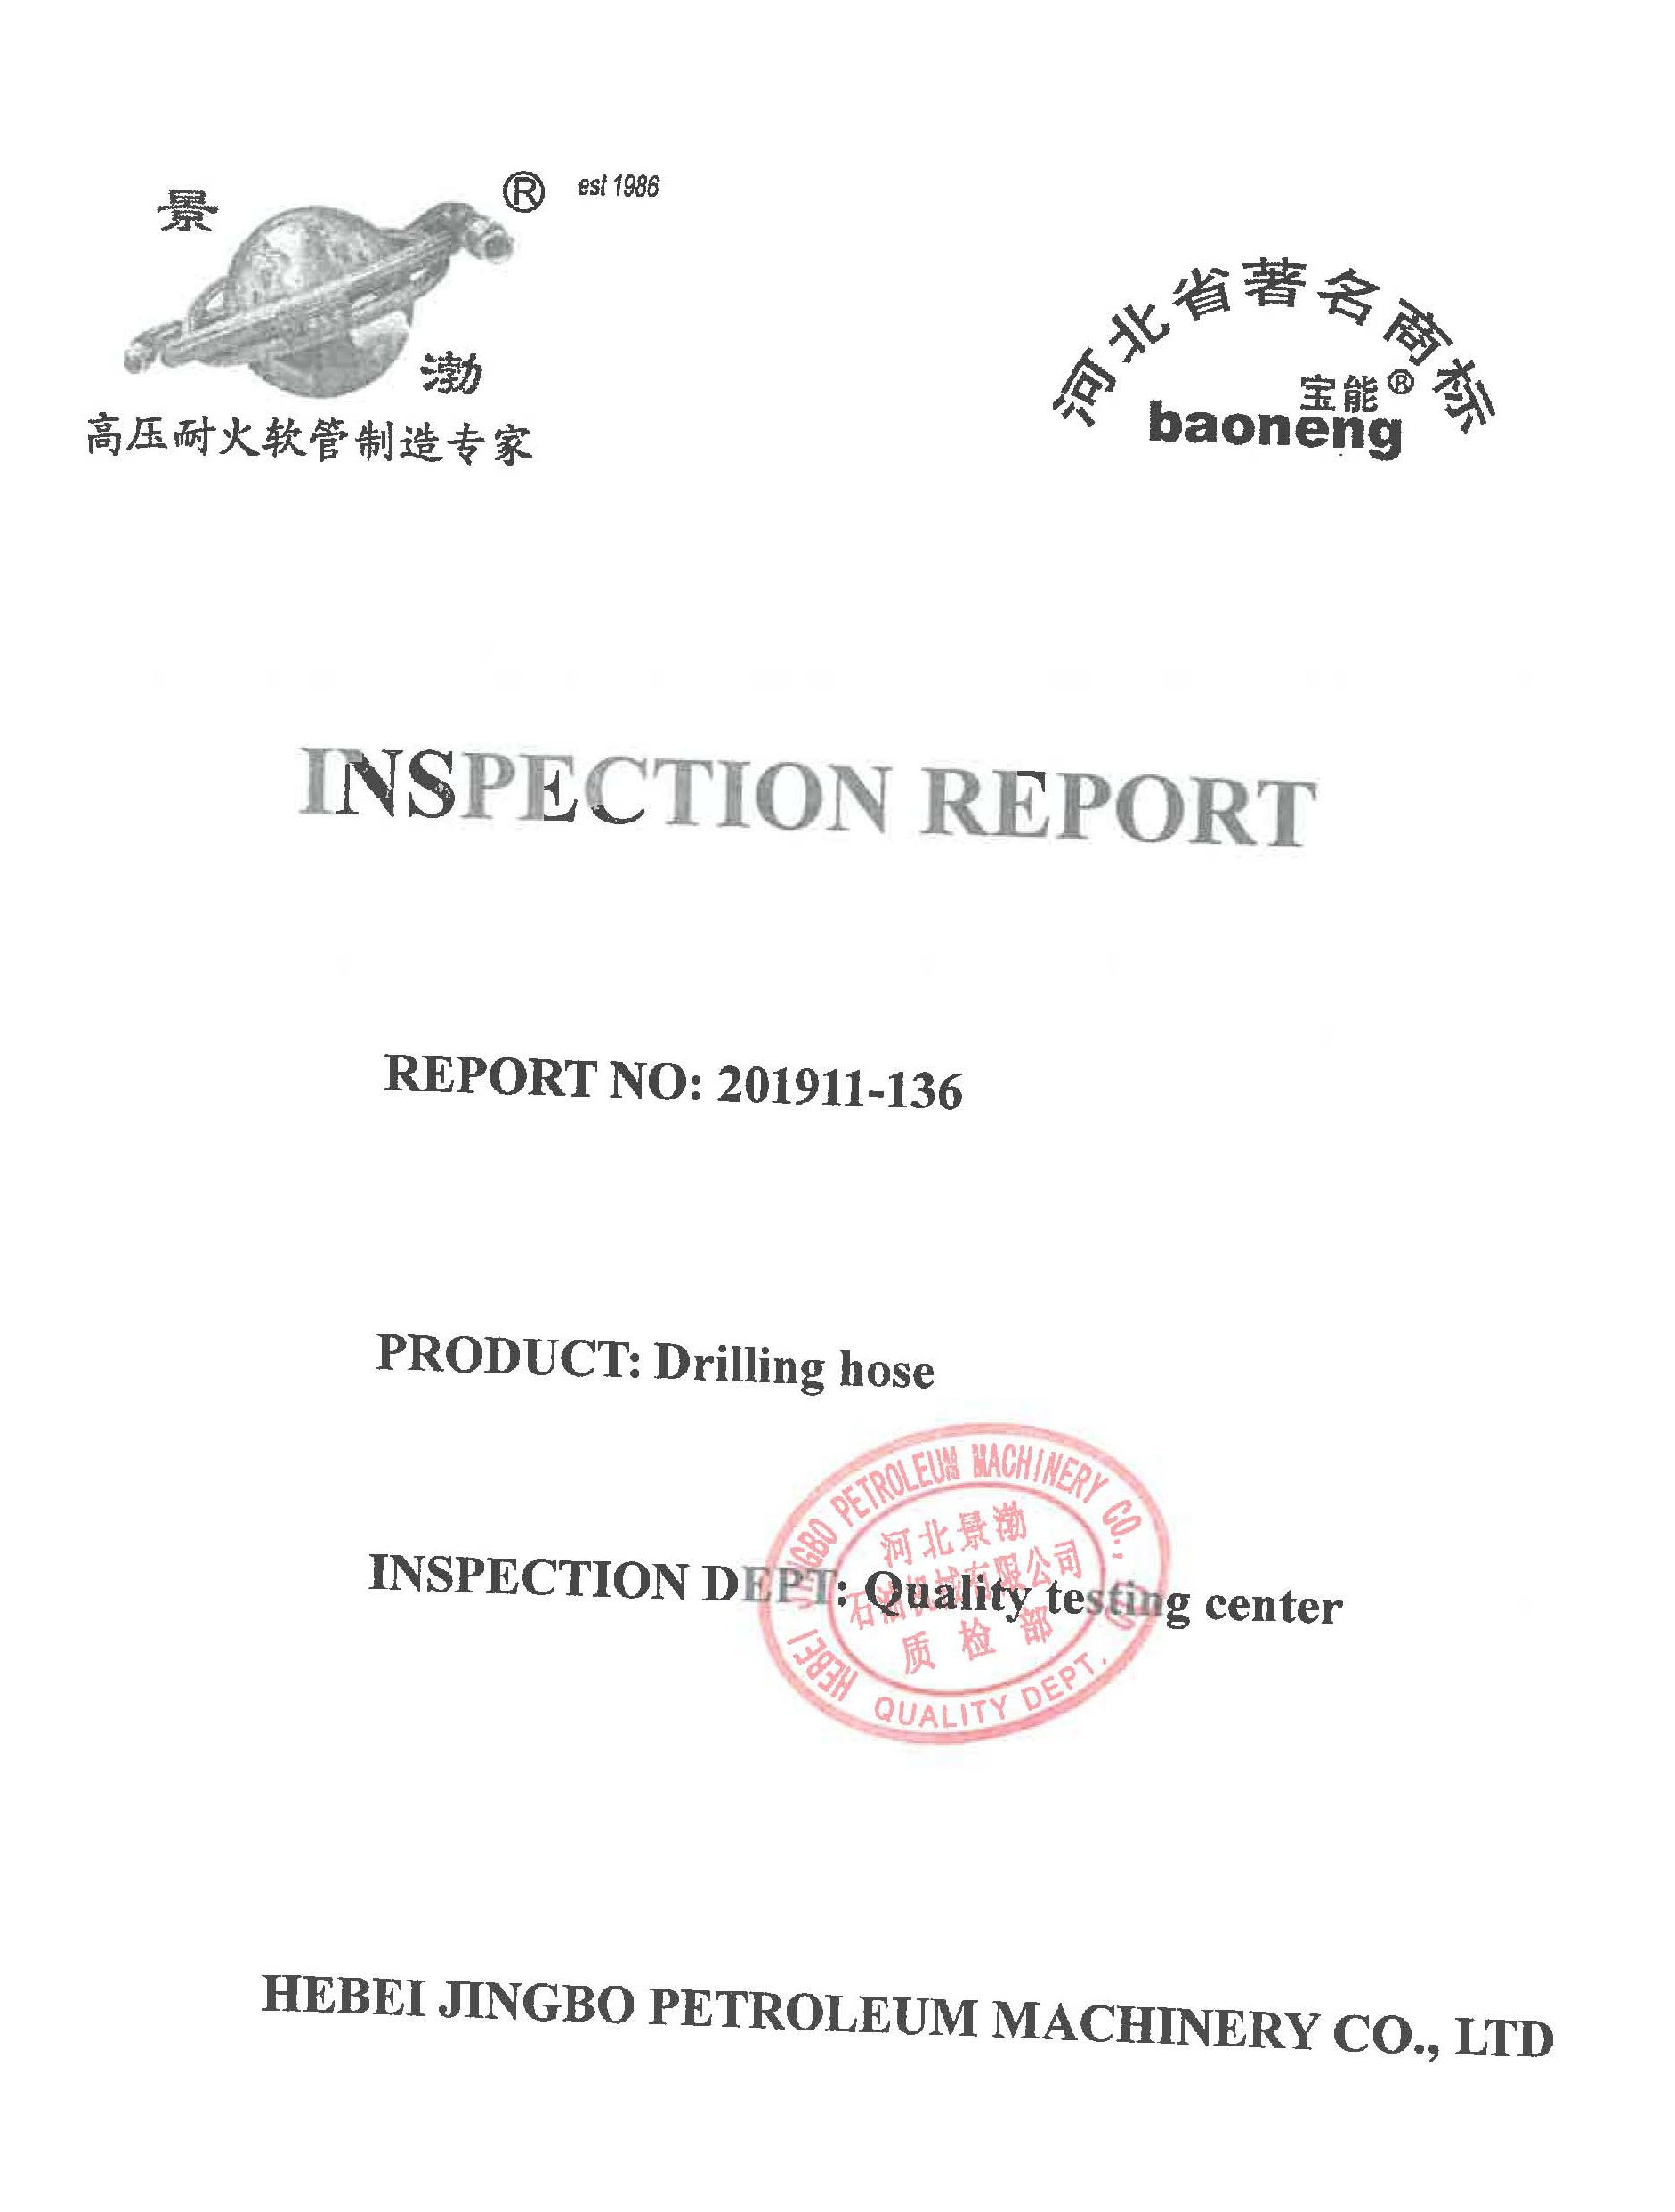 Rotary-drilling-hose-test-report-1